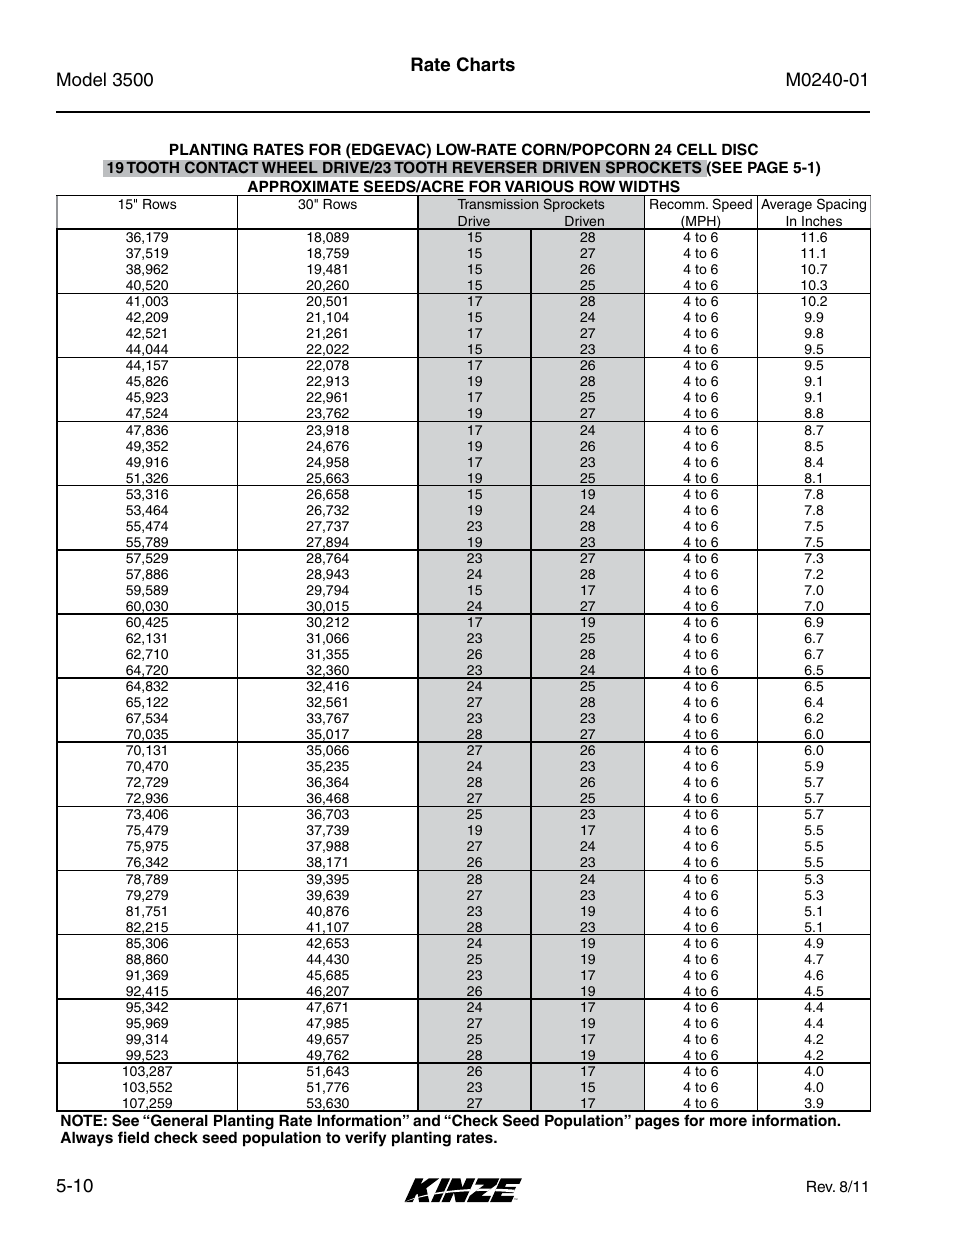 Rate charts | Kinze 3500 Lift and Rotate Planter Rev. 7/14 User Manual | Page 80 / 140